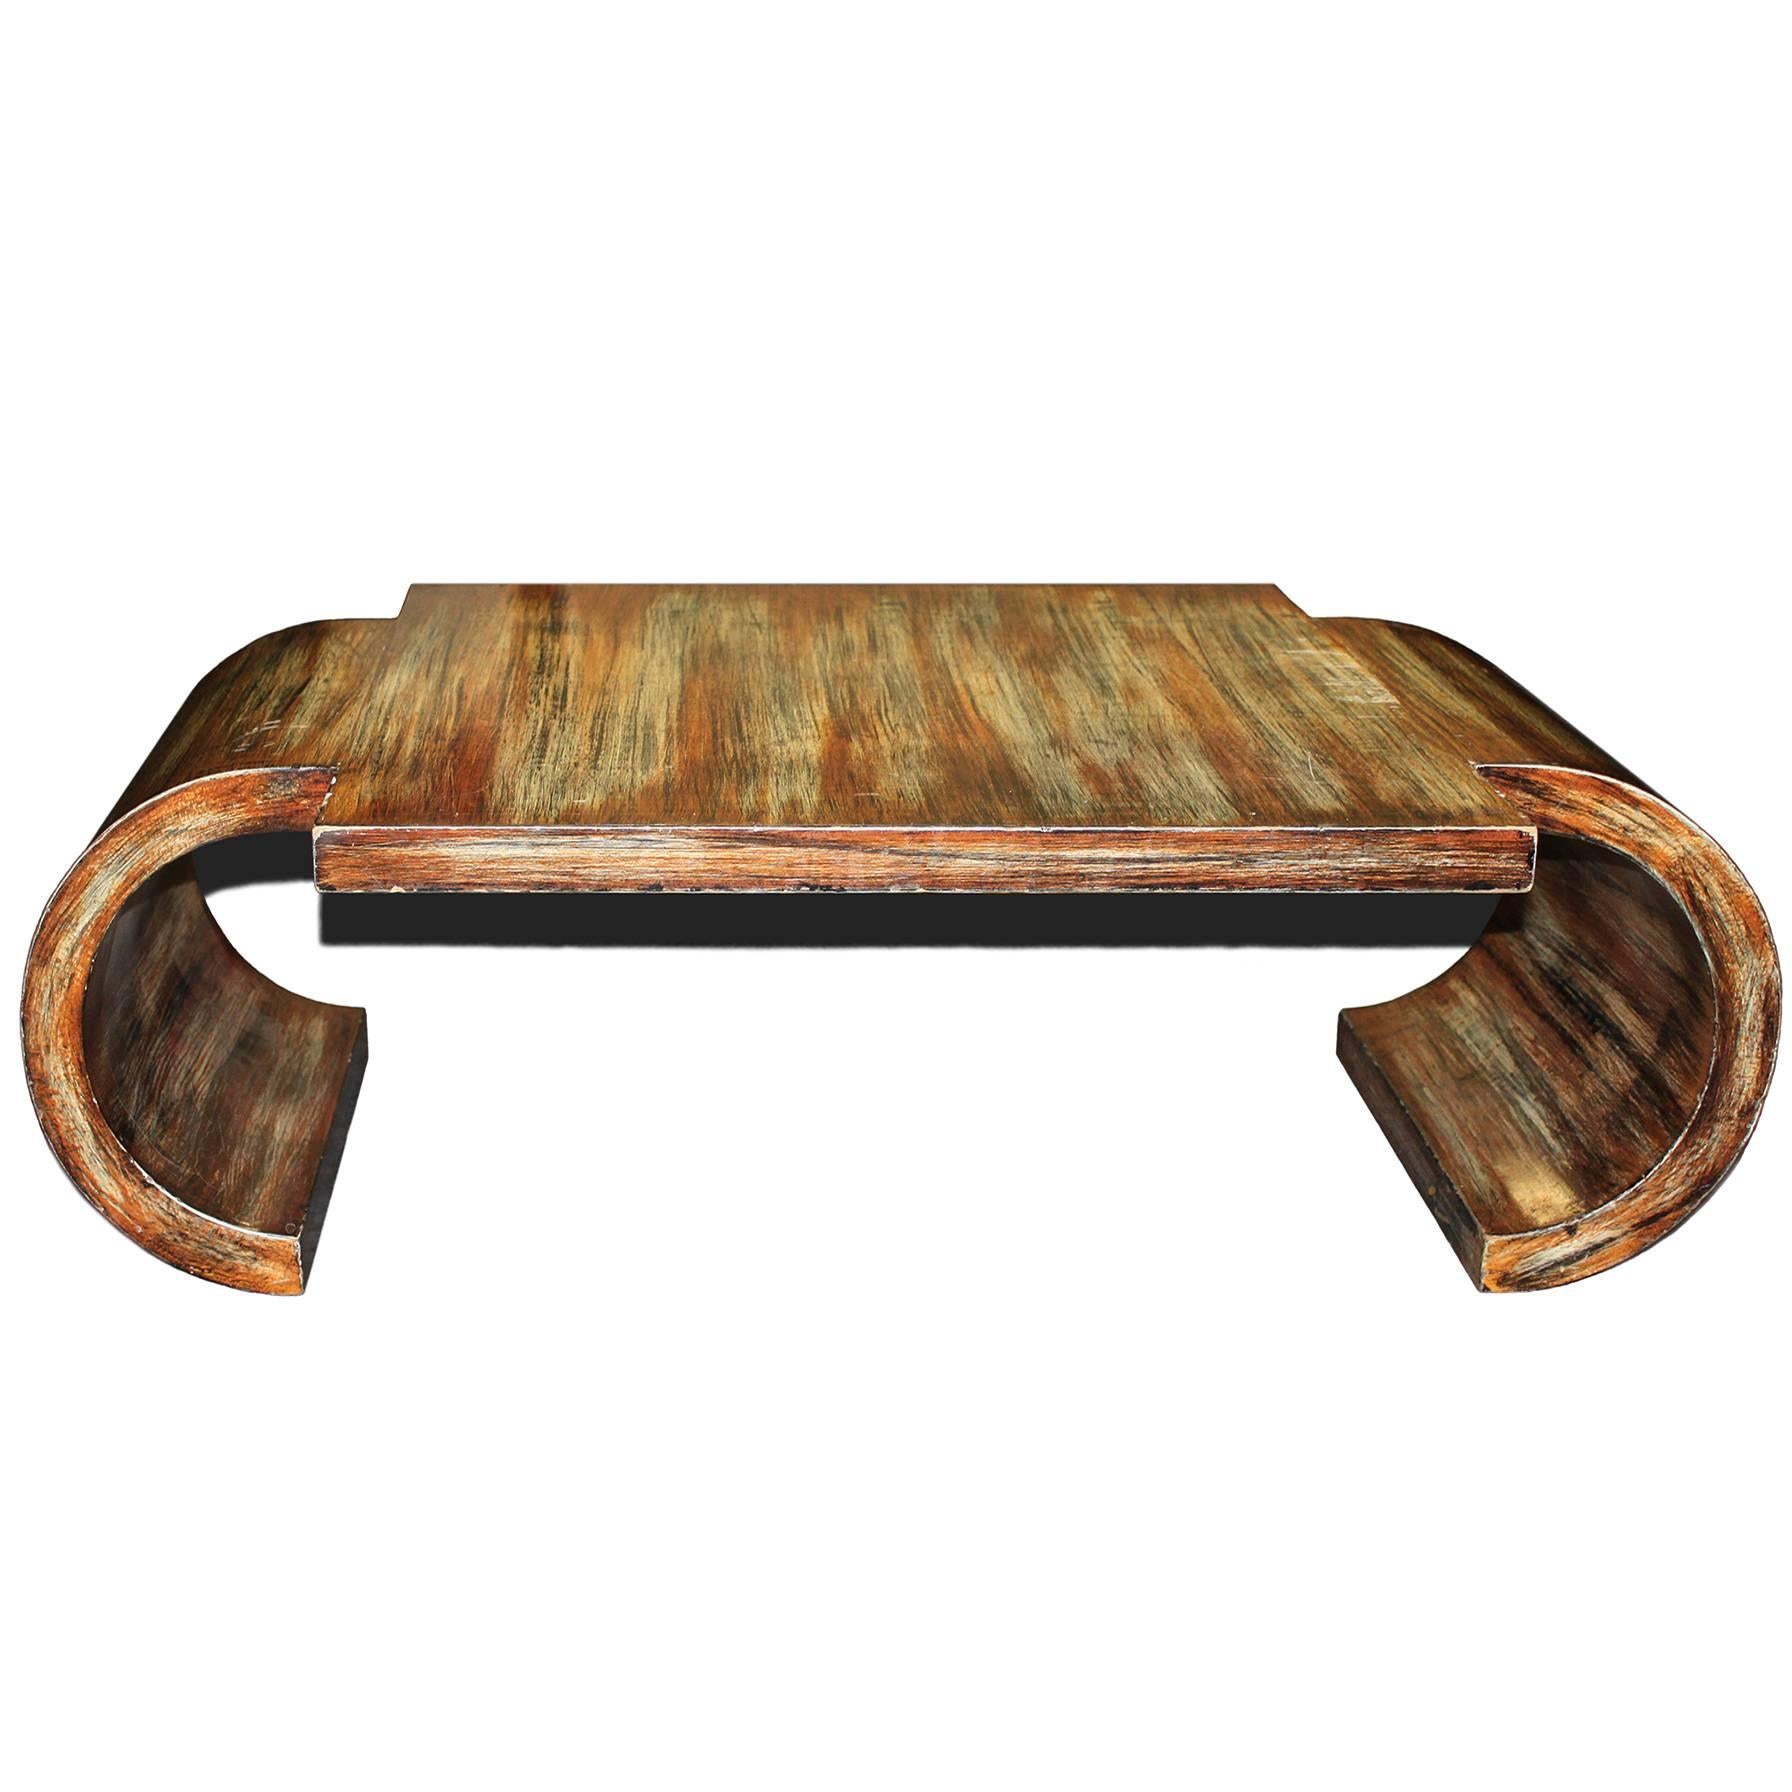 James Mont 20th Century Scroll Coffee Table with Polychrome Finish For Sale